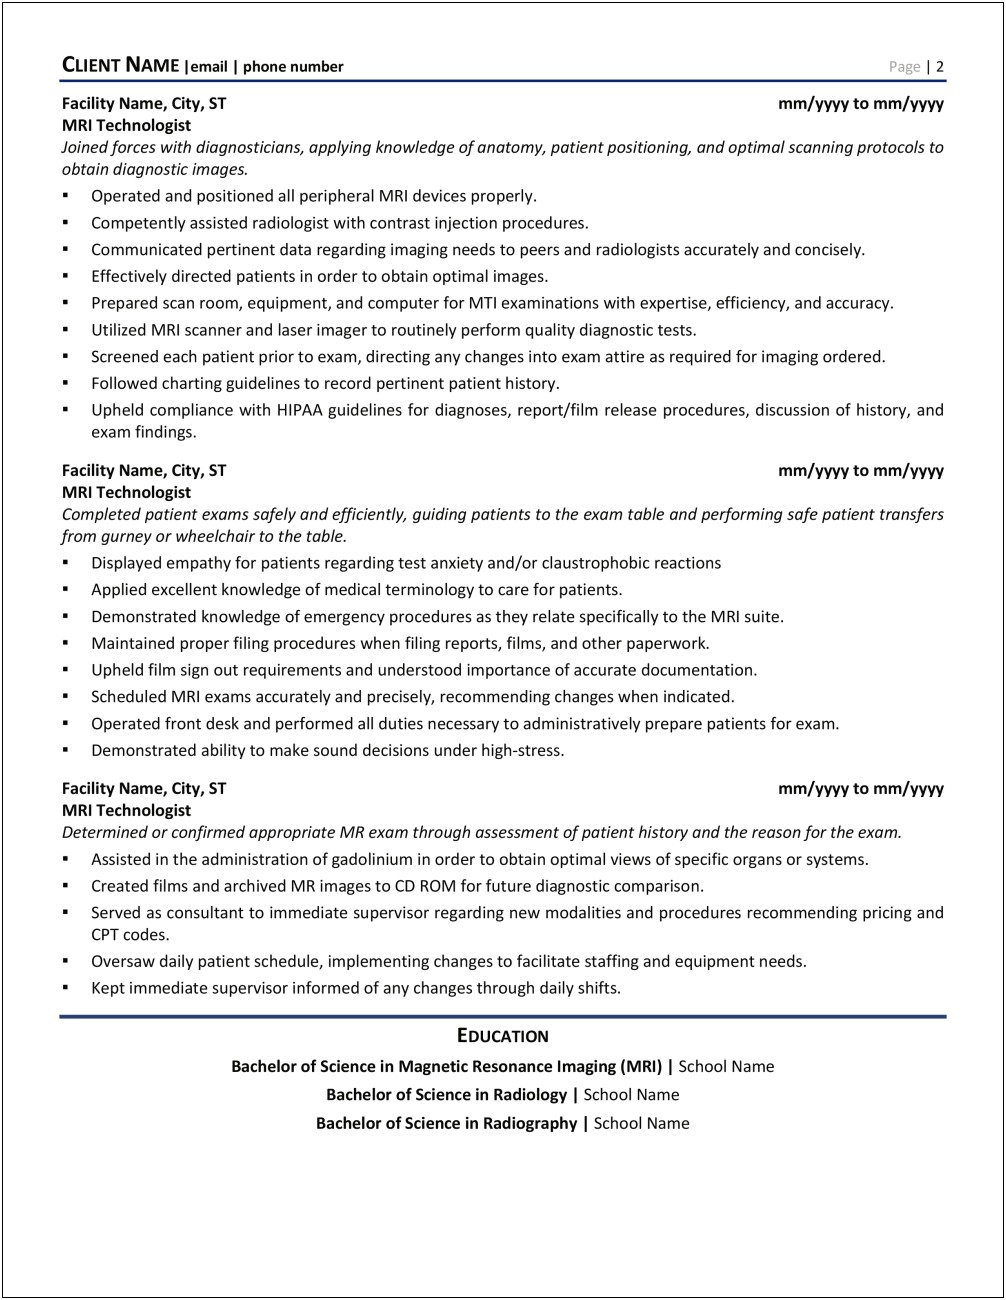 Resume Examples Of Imaging Managers